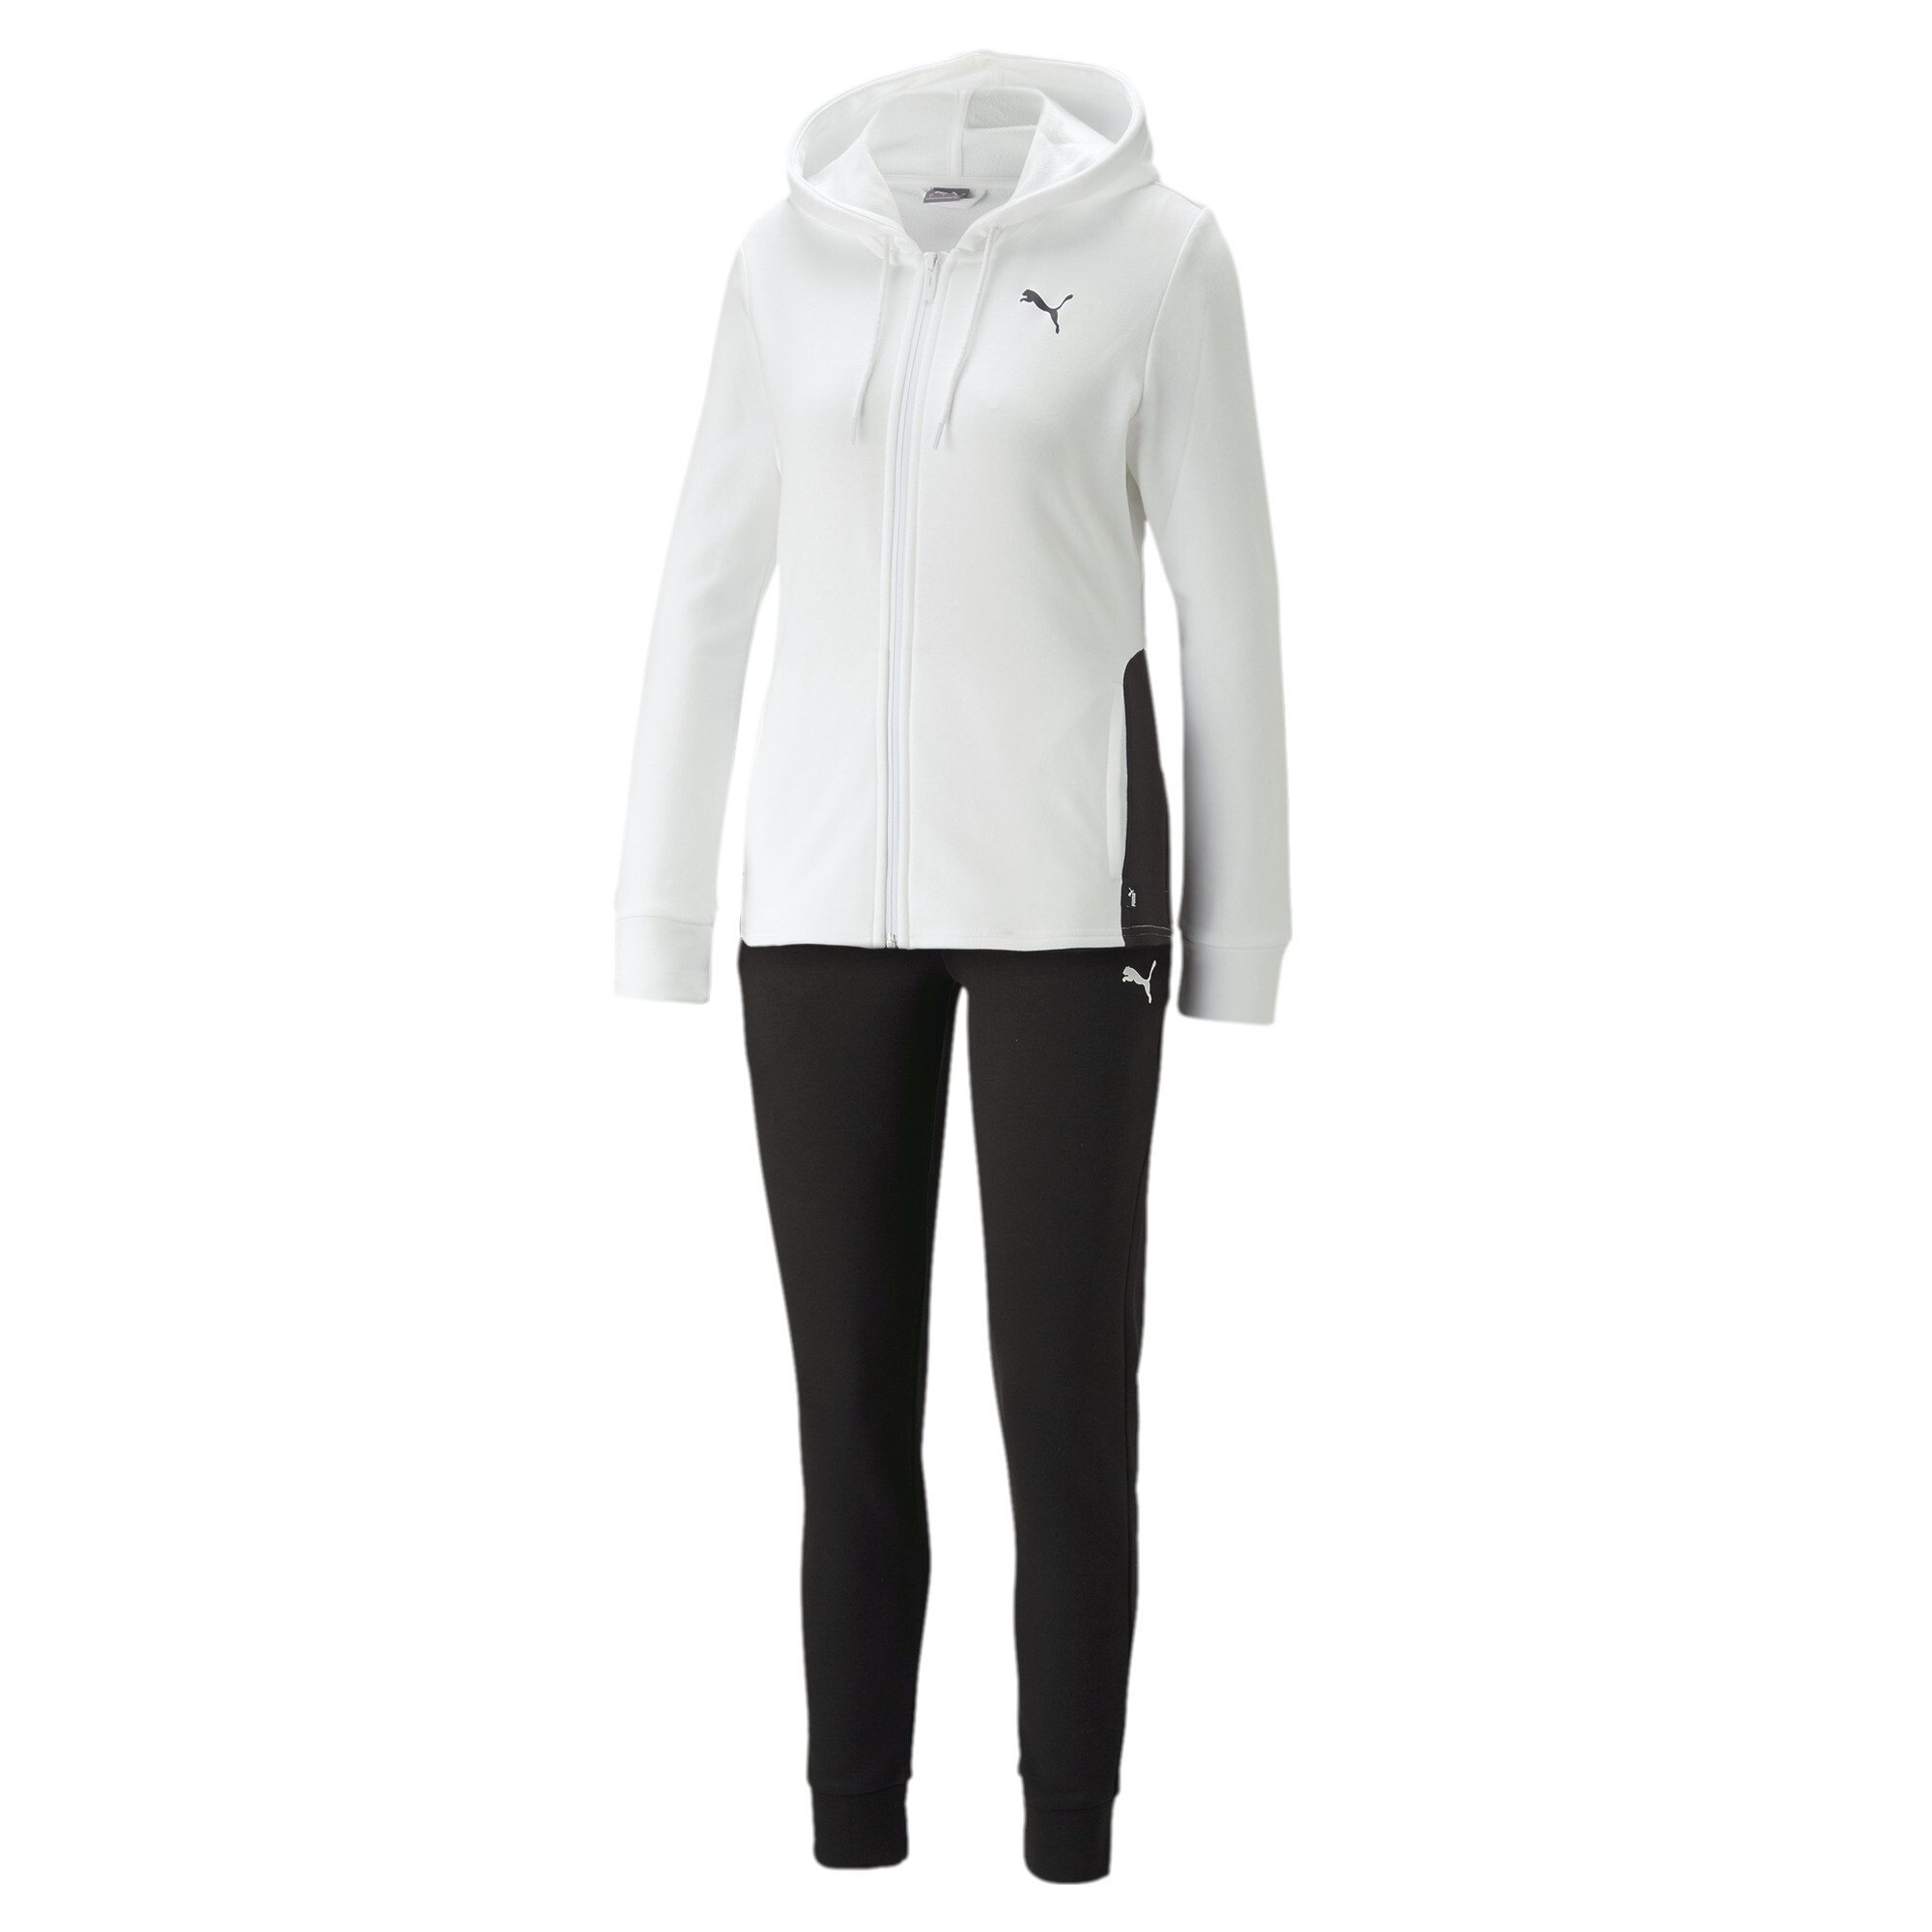 Women's Puma Classic Hooded Tracksuit, White, Size L, Clothing